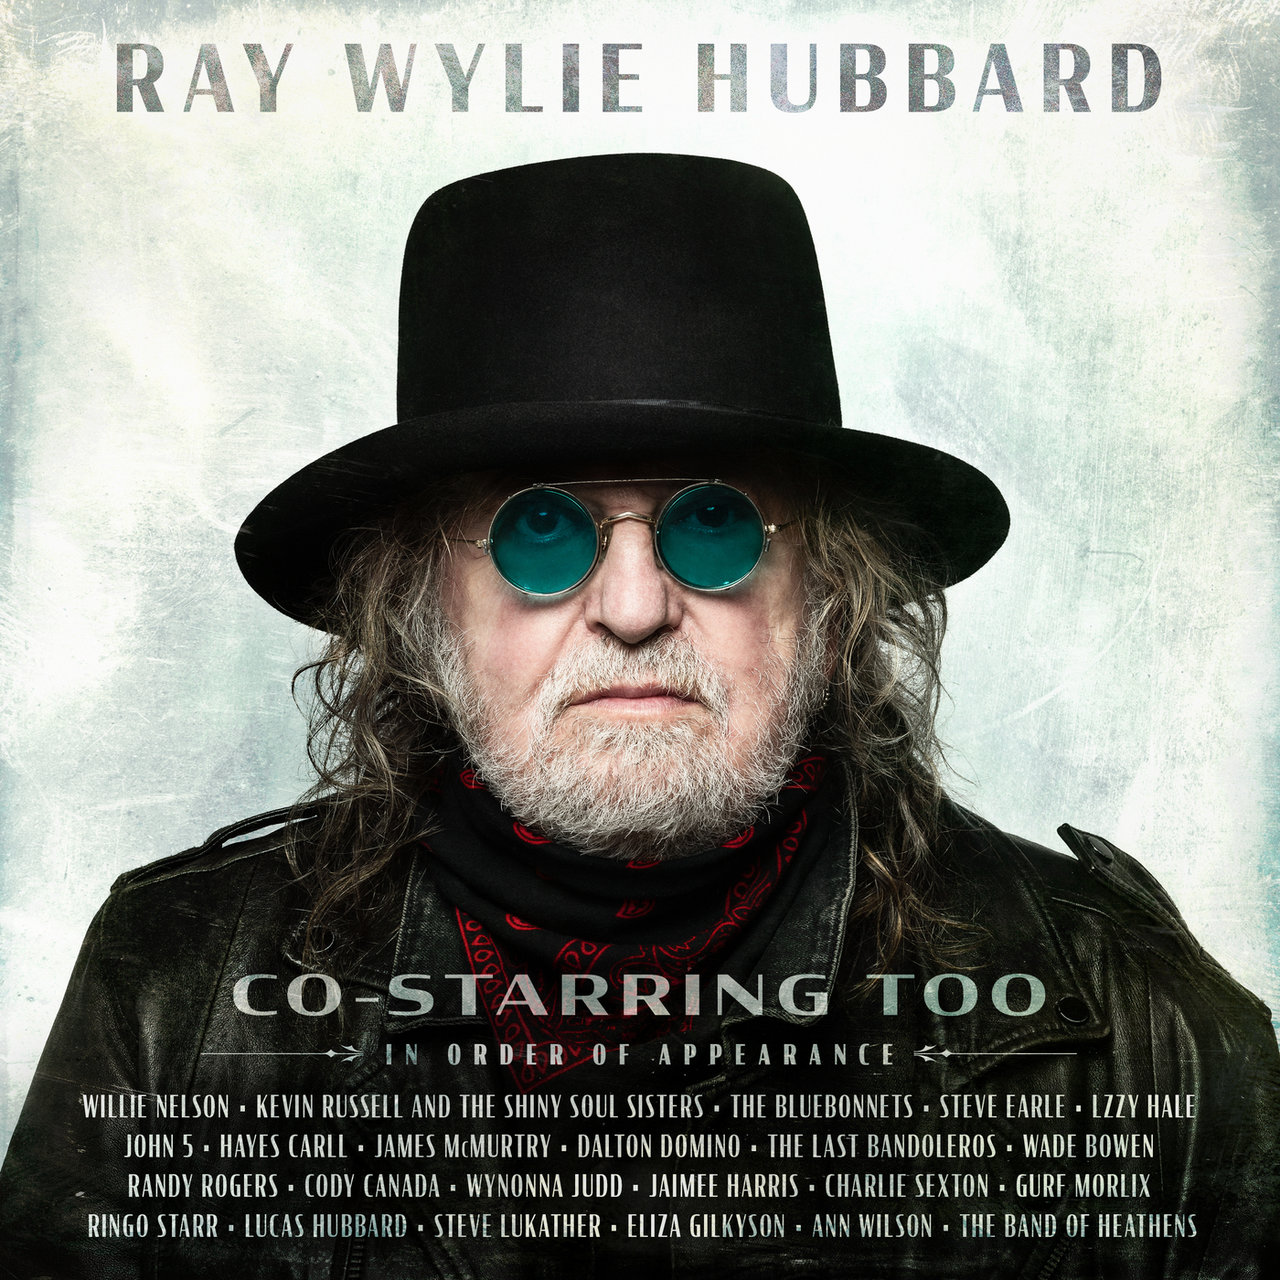 Art for Even If My Wheels Fall Off by Ray Wylie Hubbard featuring Wade Bowen, Randy Rogers & Cody Canada